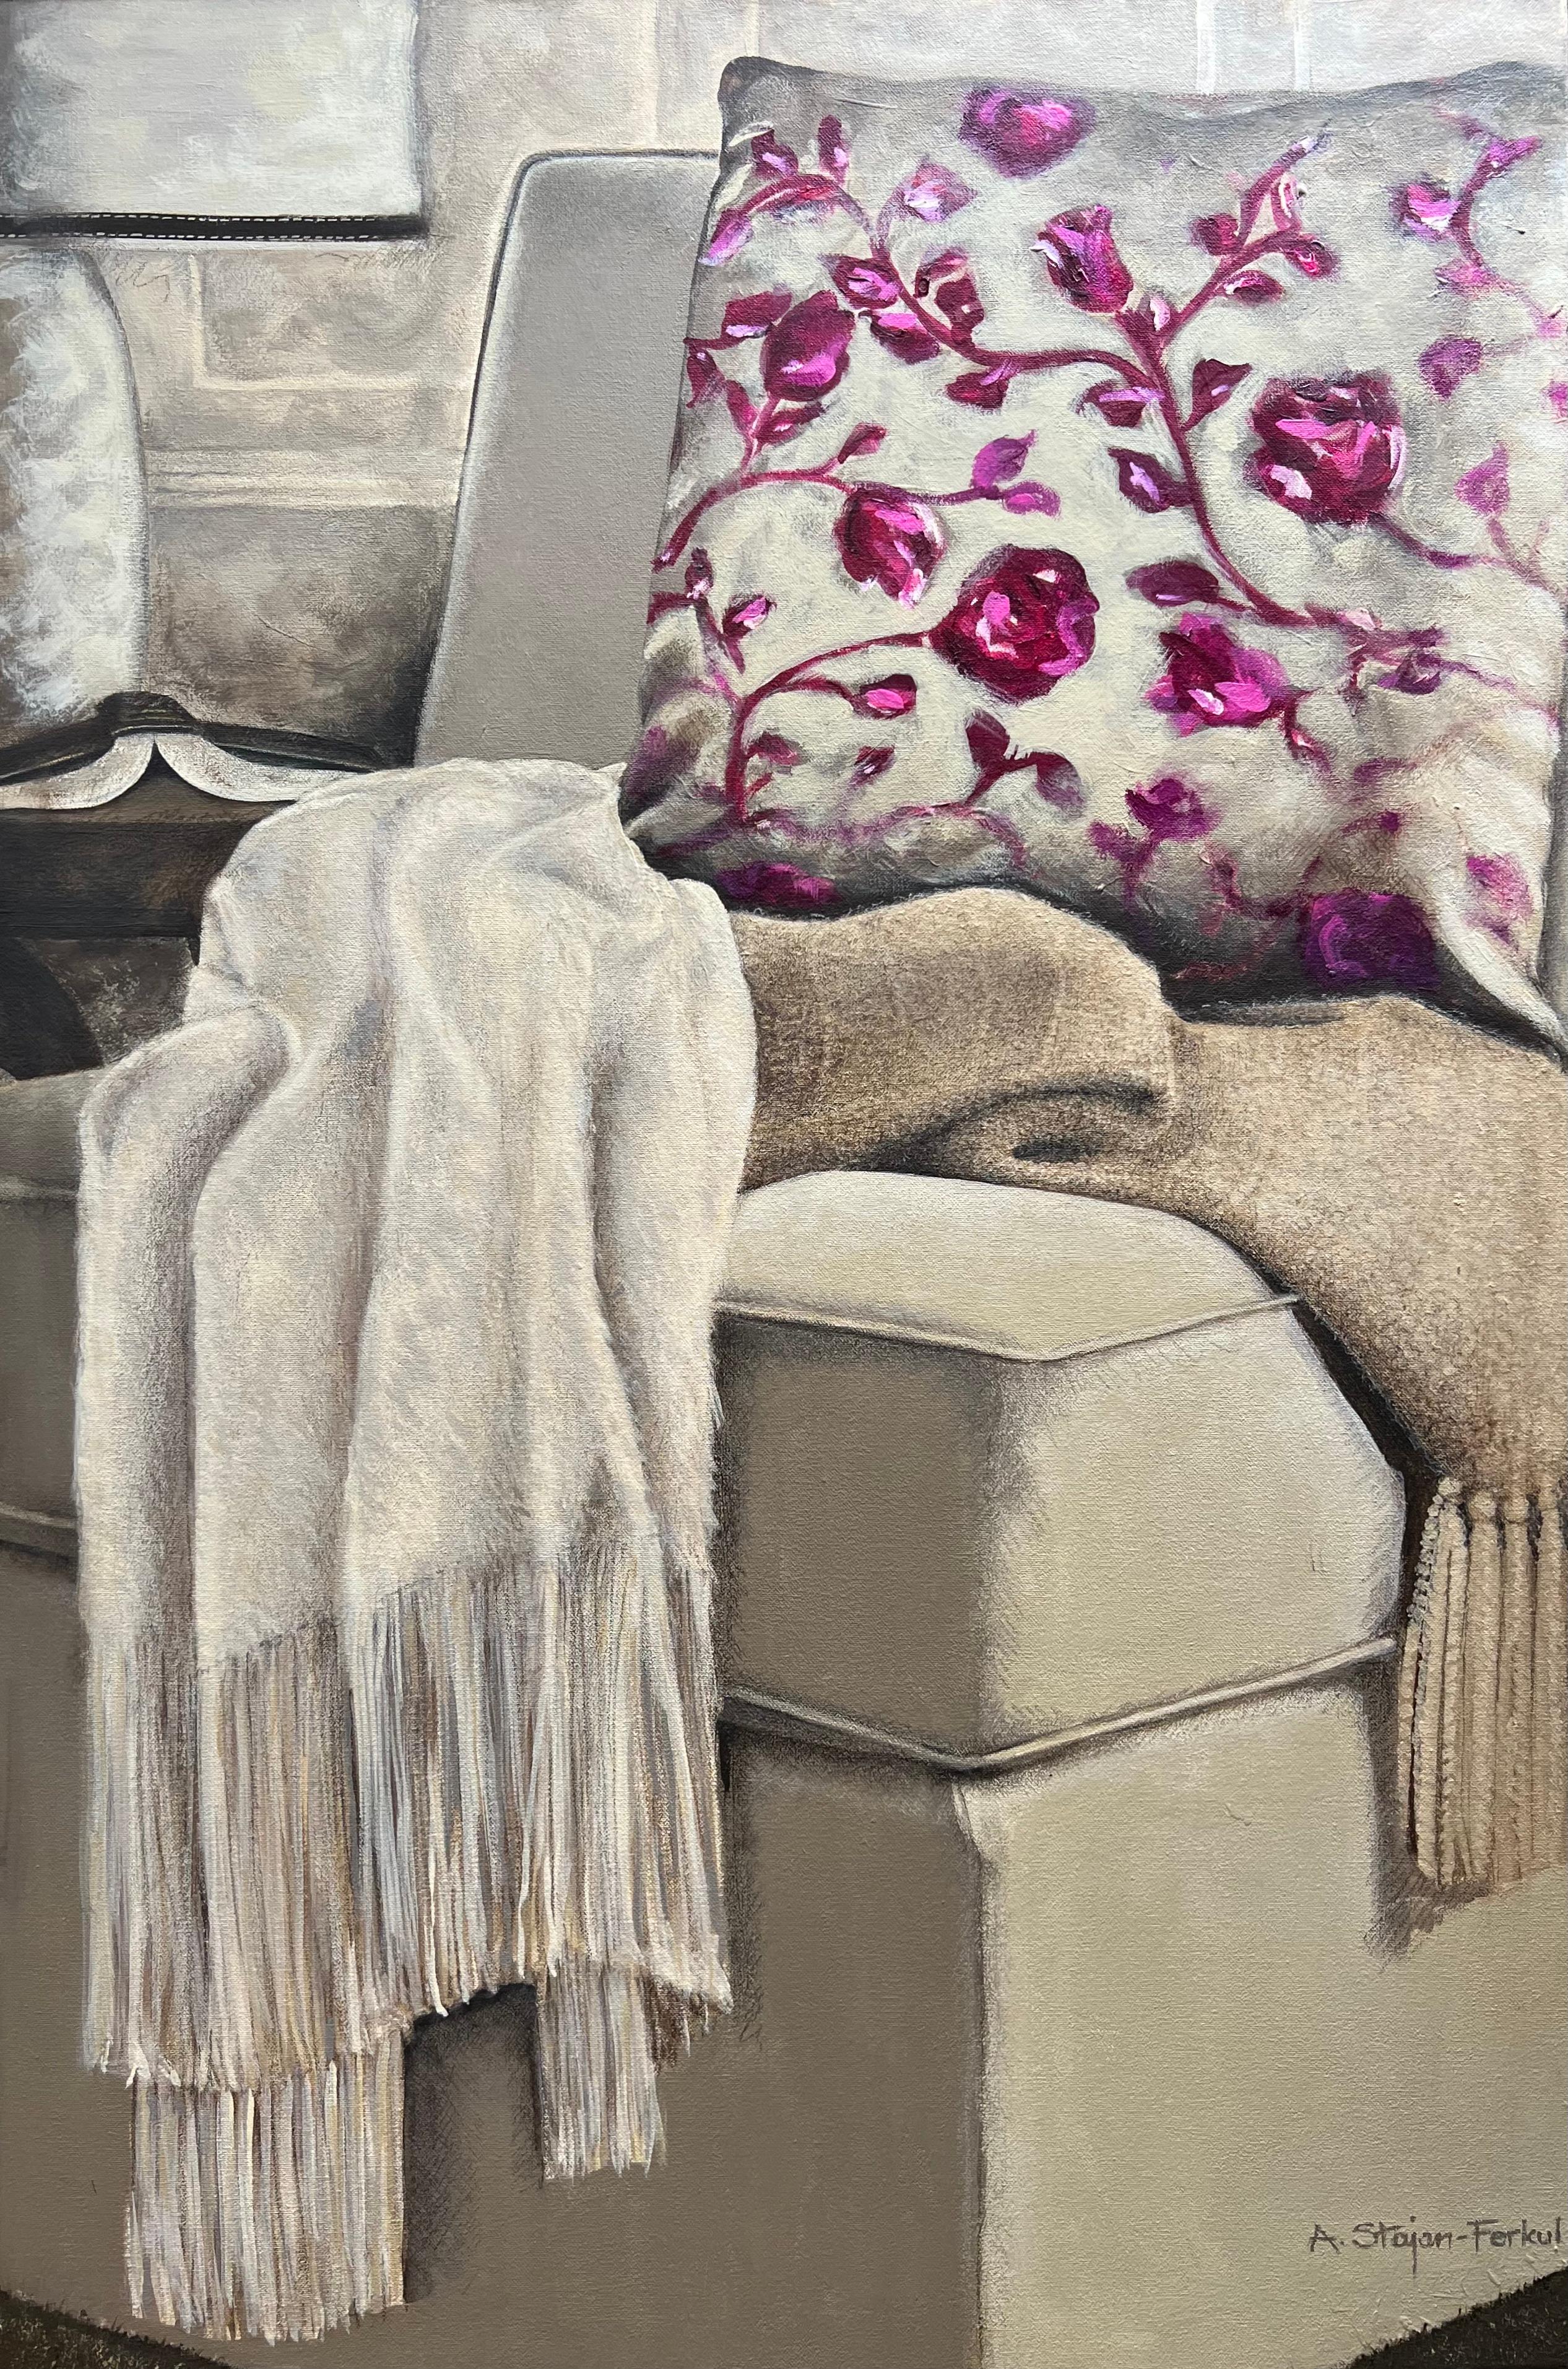 Andrea Stajan-Ferkul Interior Painting - Quiet Time - 24"x36", Interior Still-Life Painting, Pink, Beige, Pillow, Chair